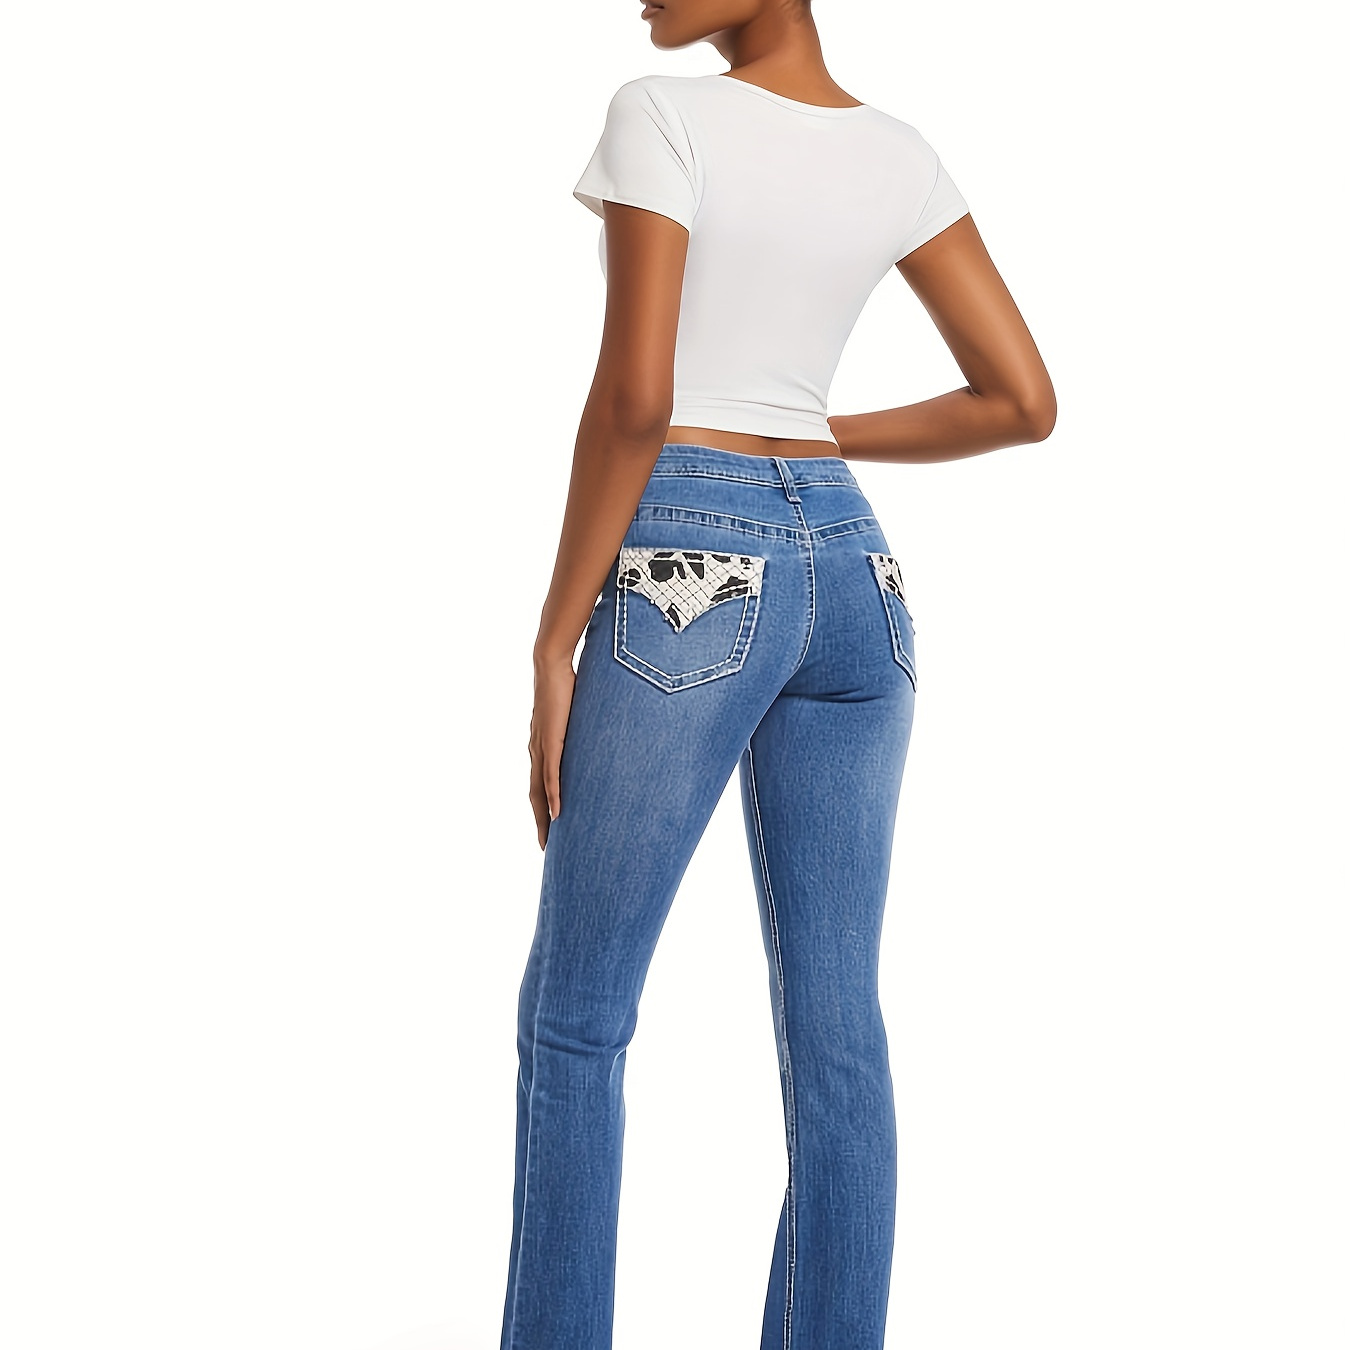 

Women's Blue Slim Fit Pocket Detail Denim Jeans - Casual Style, Versatile And Comfortable Wear, All-season Sexy Stretchy Bootcut Jeans